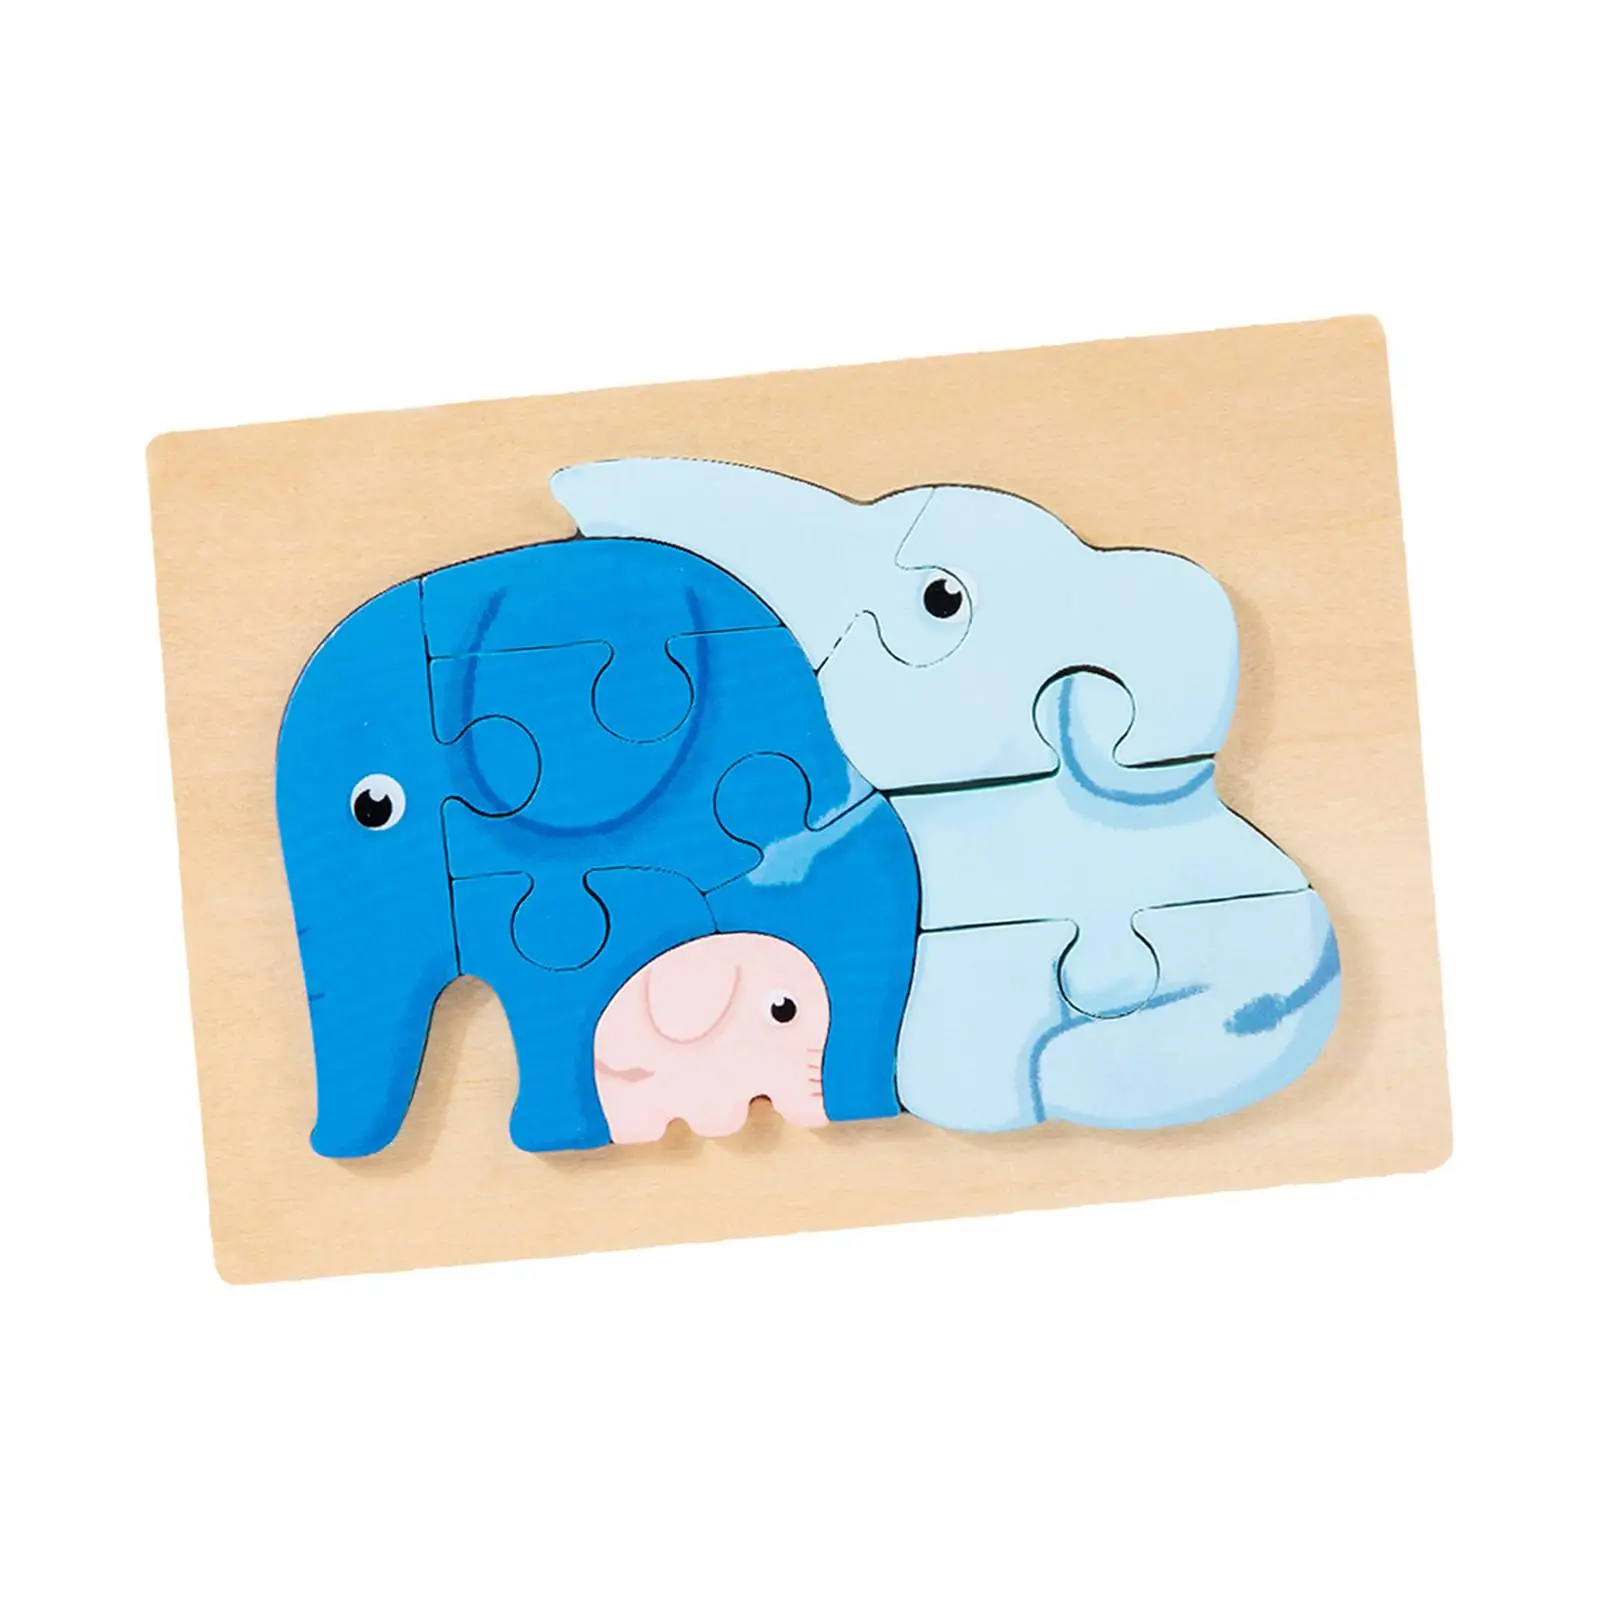 Montessori Animal Jigsaw Puzzles Educational Developmental Toy Cognition Intelligence Puzzle for Toddlers Kids Girls Preschool